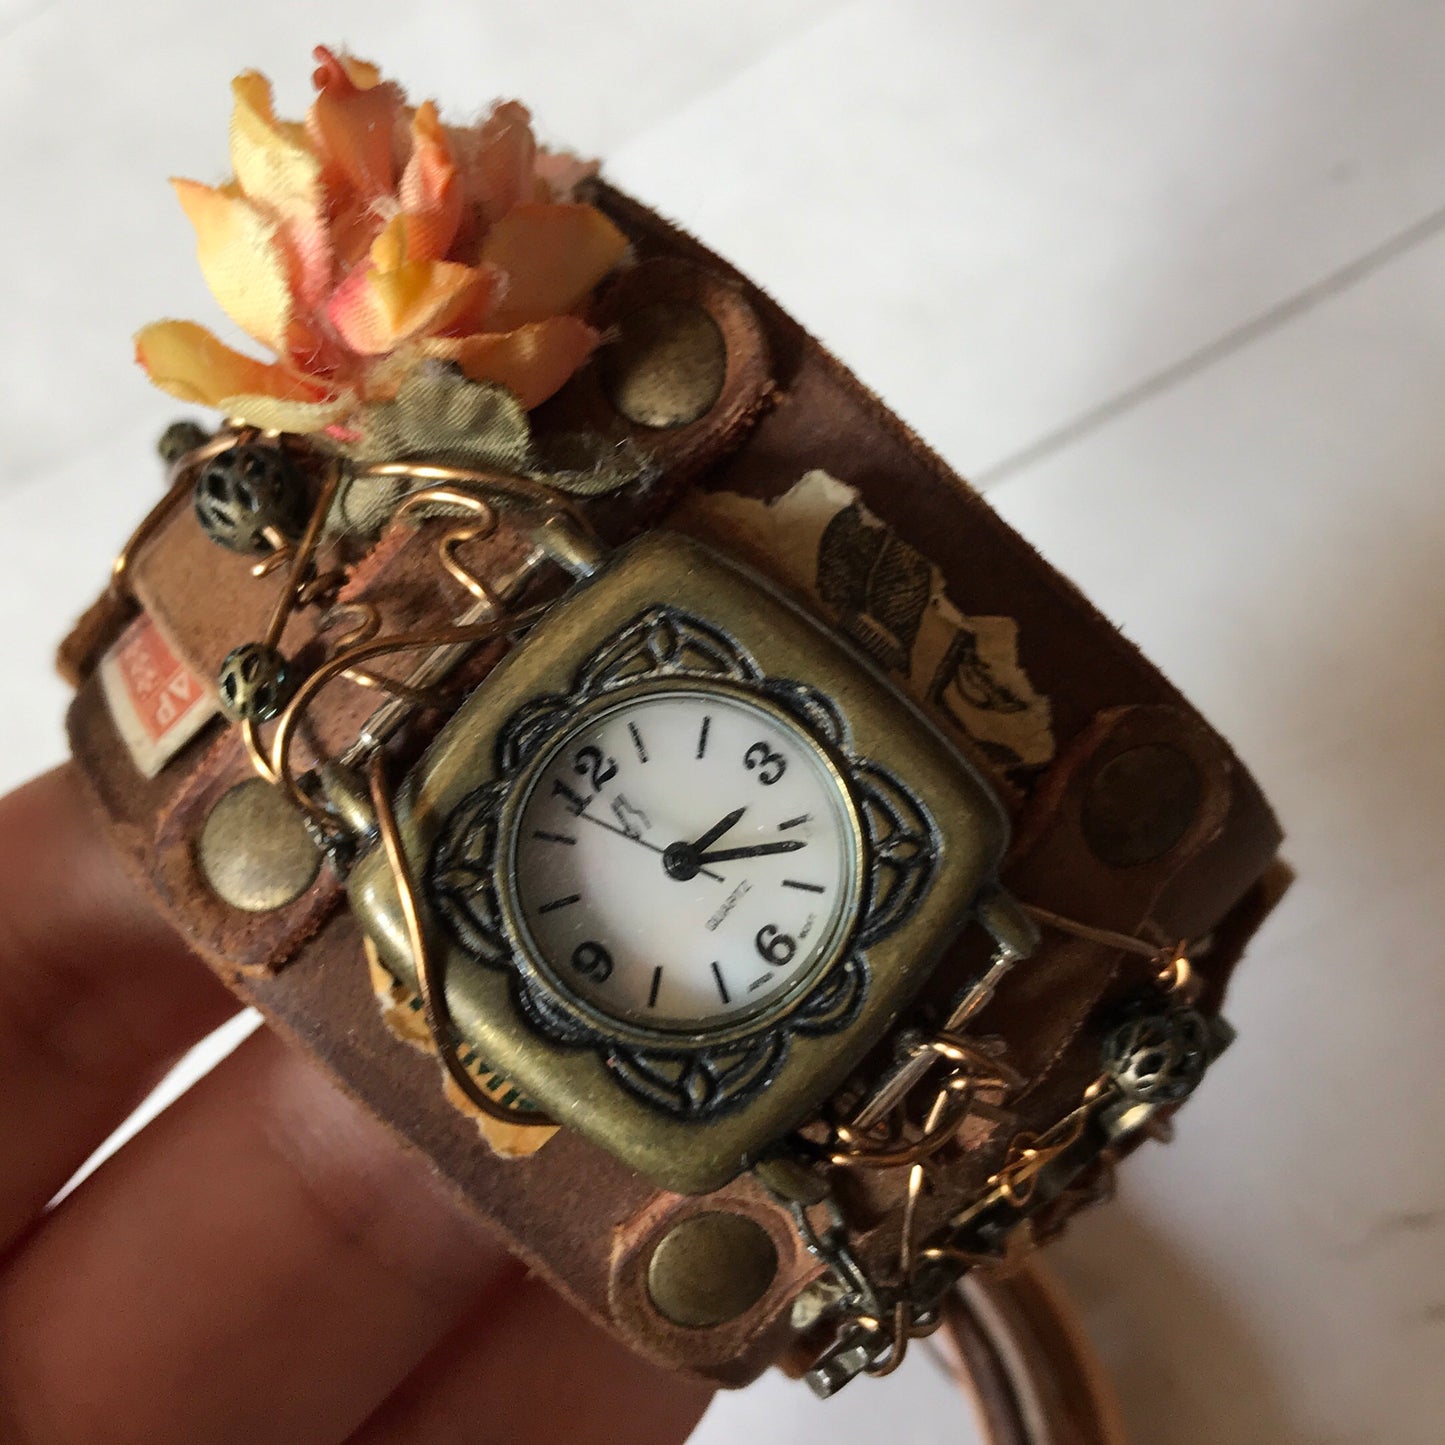 Personal Collection: The Time-Traveler’s Wristwatch